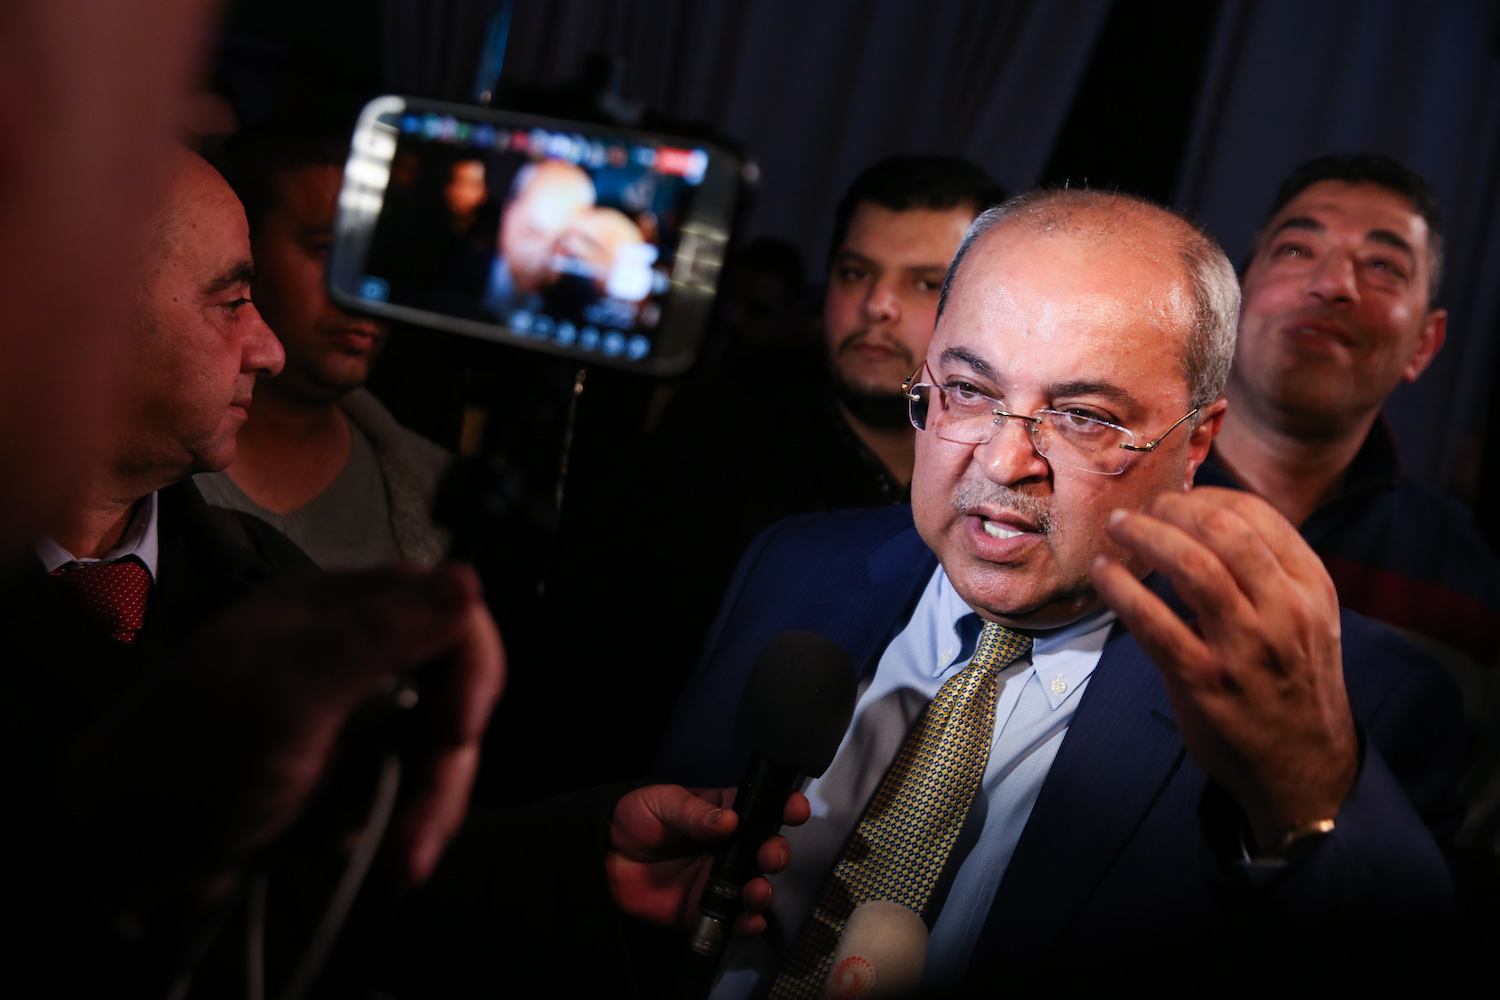 Joint List party member Ahmad Tibi speaks at the party headquarters in Shfar'am, March 2, 2020. (David Cohen/Flash90)